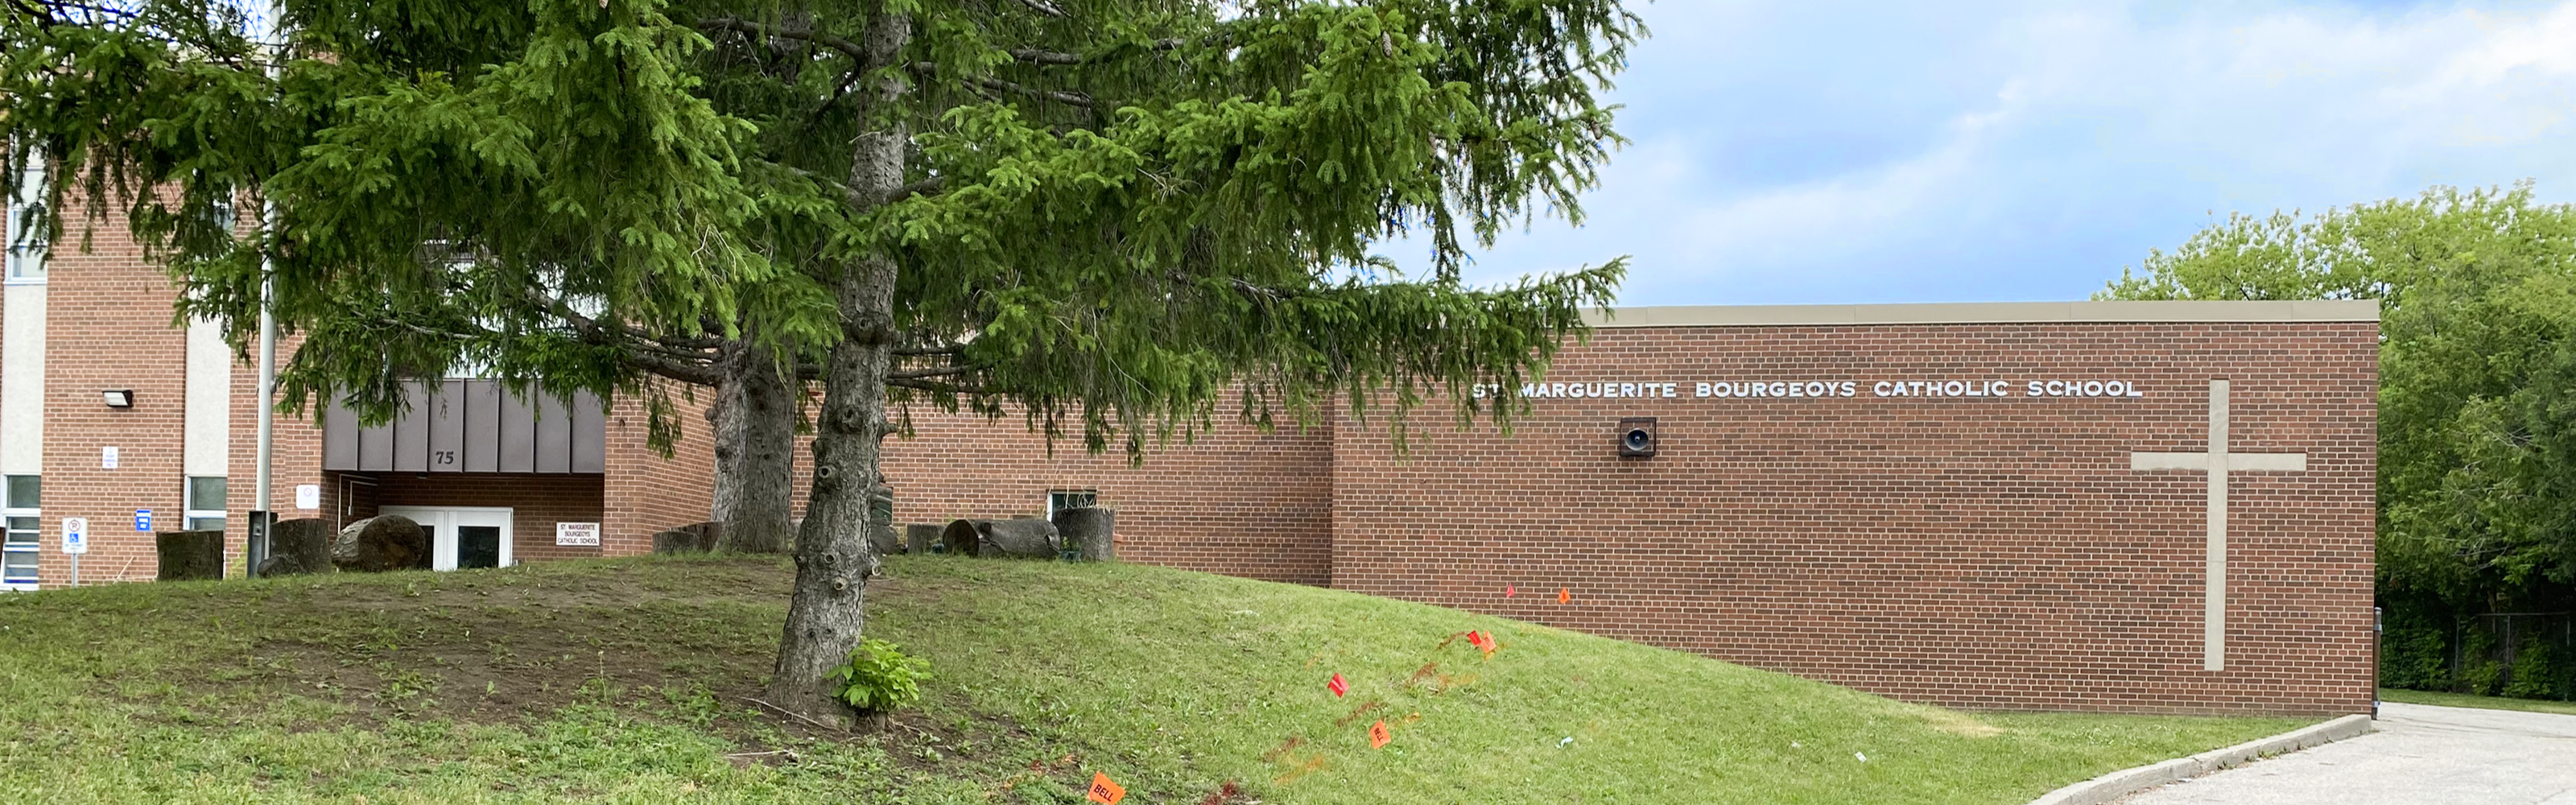 The front of the St. Marguerite Bourgeoys Catholic School building